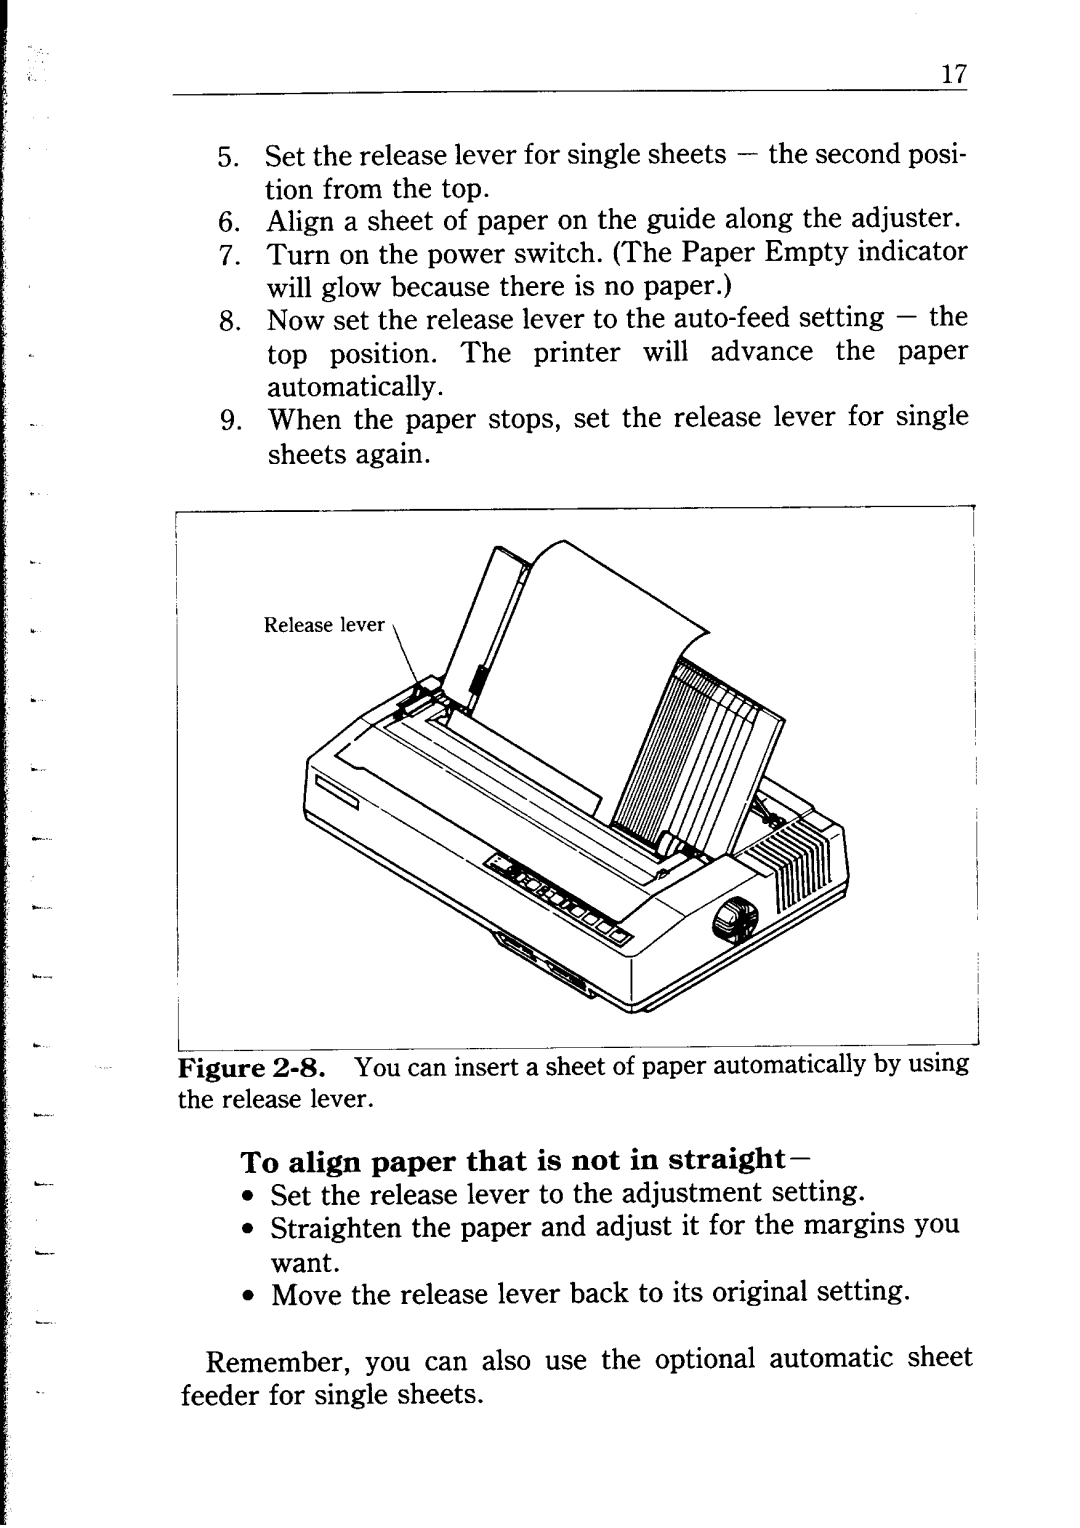 Star Micronics NB24-10/15 user manual To align paper that is not in straight 